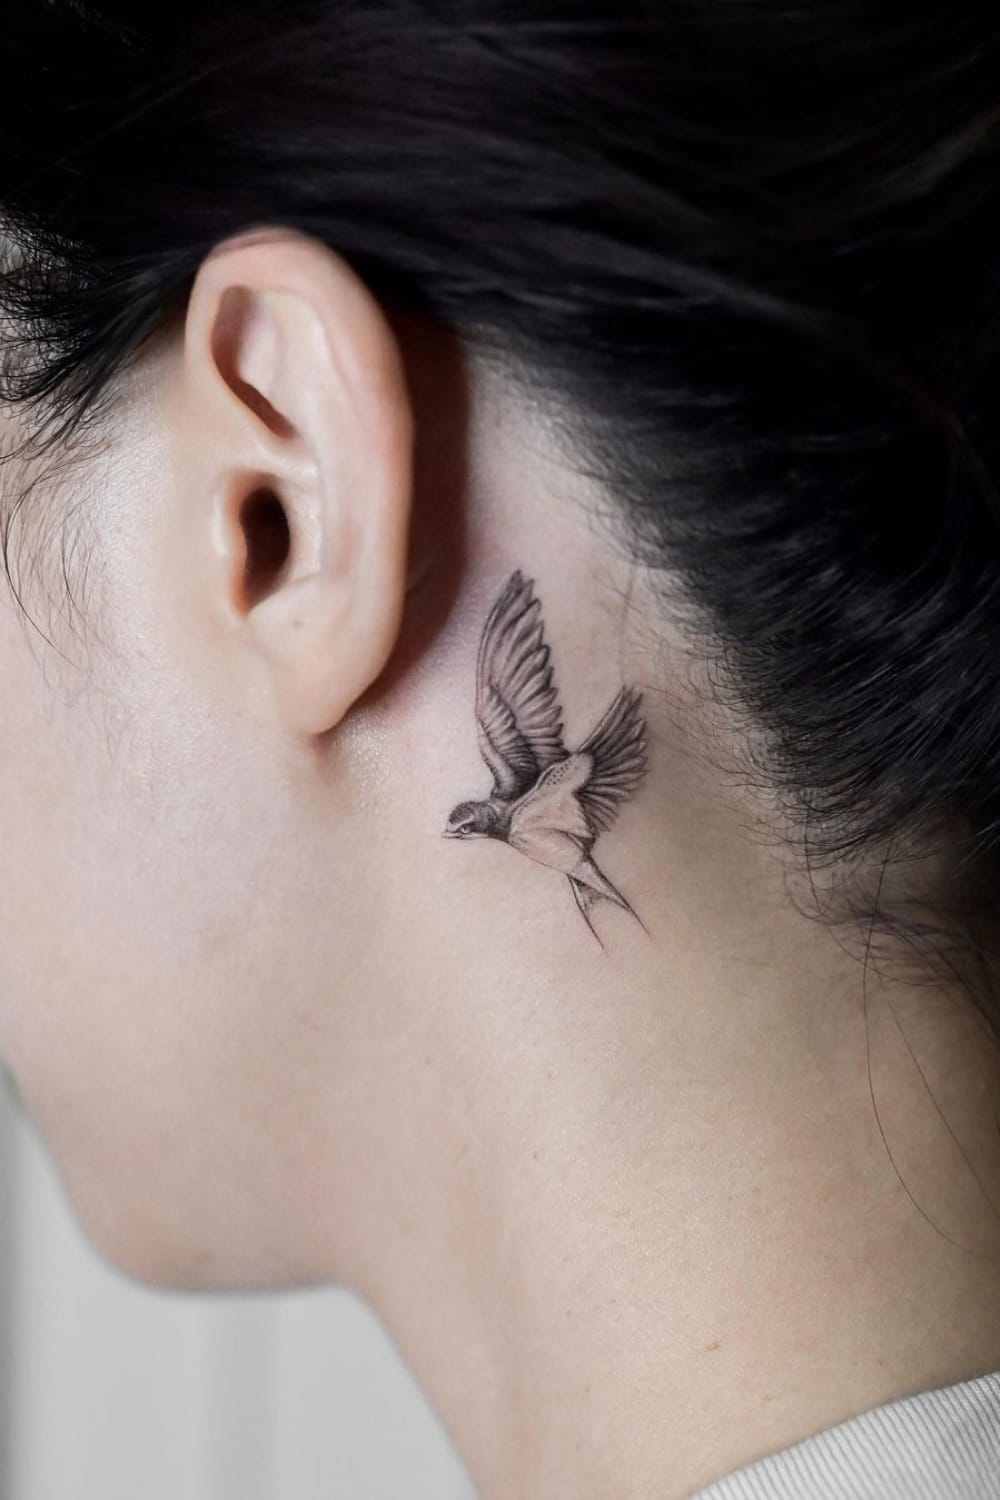 41 Unique Swallow Tattoo Ideas With Meaning